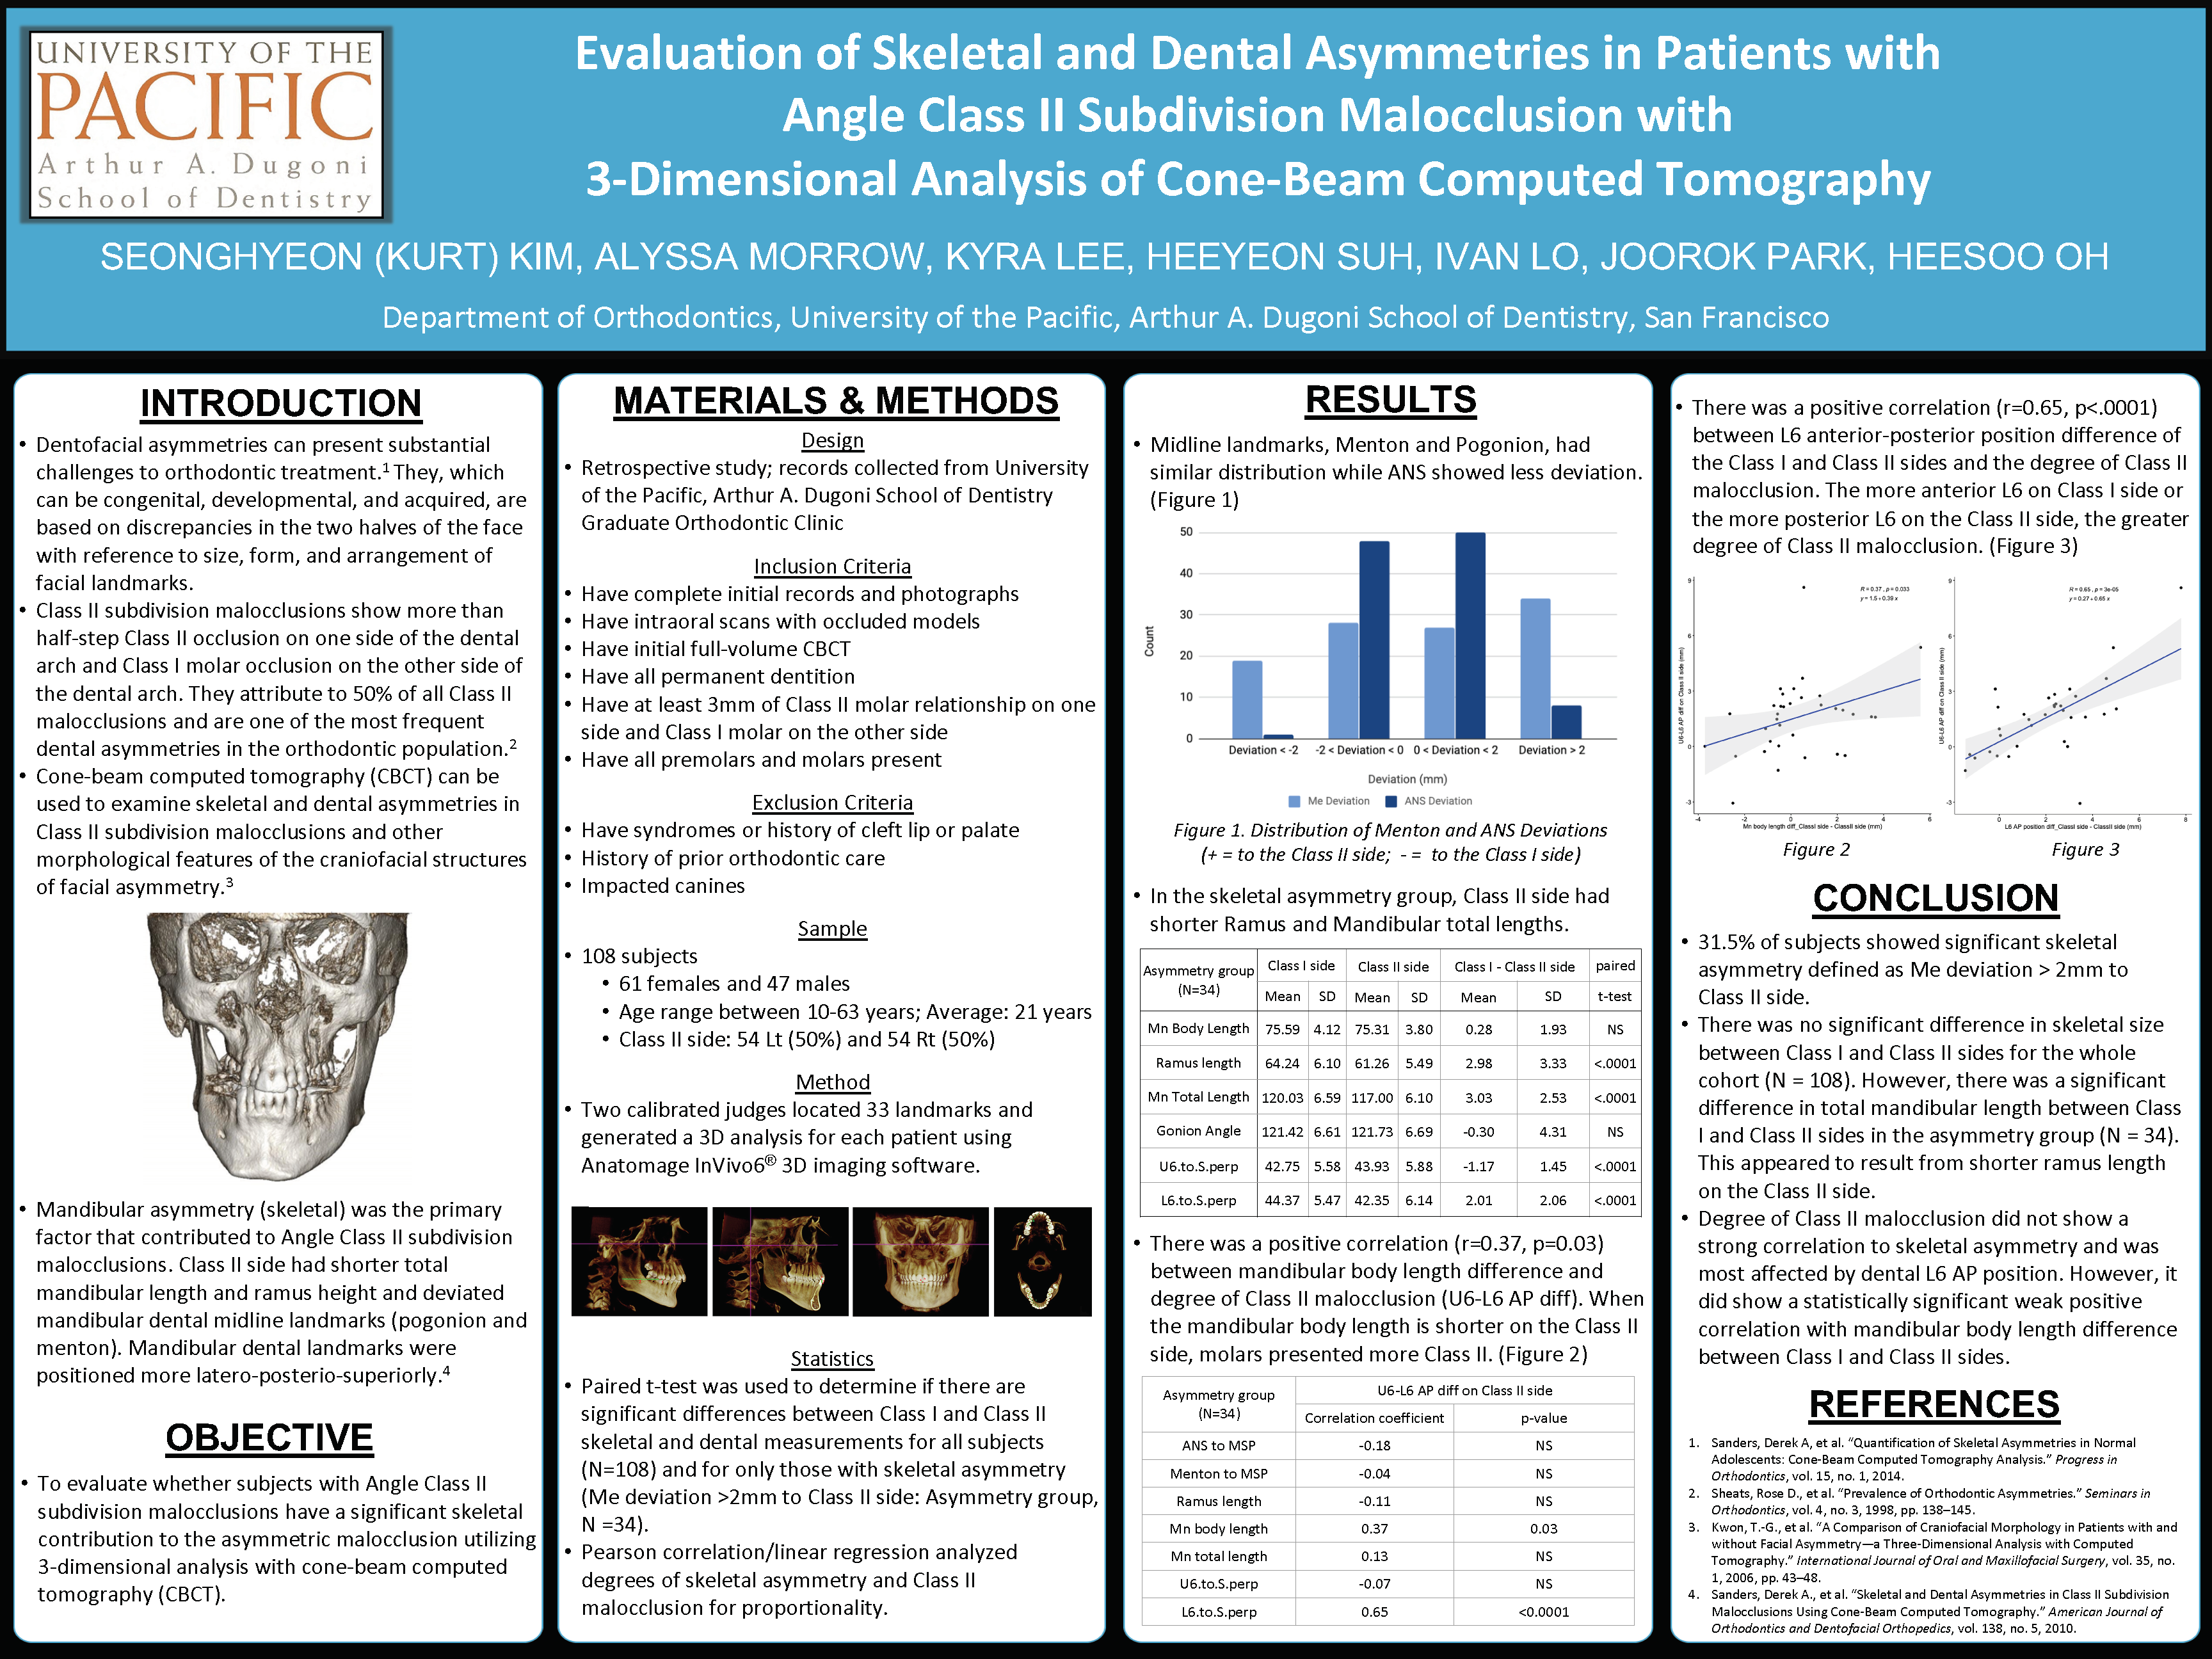 Evaluation of Skeletal and Dental Asymmetries in Patients with Angle Class II Subdivision Malocclusion with 3-Dimensional Analysis of Cone-Beam Computed Tomography